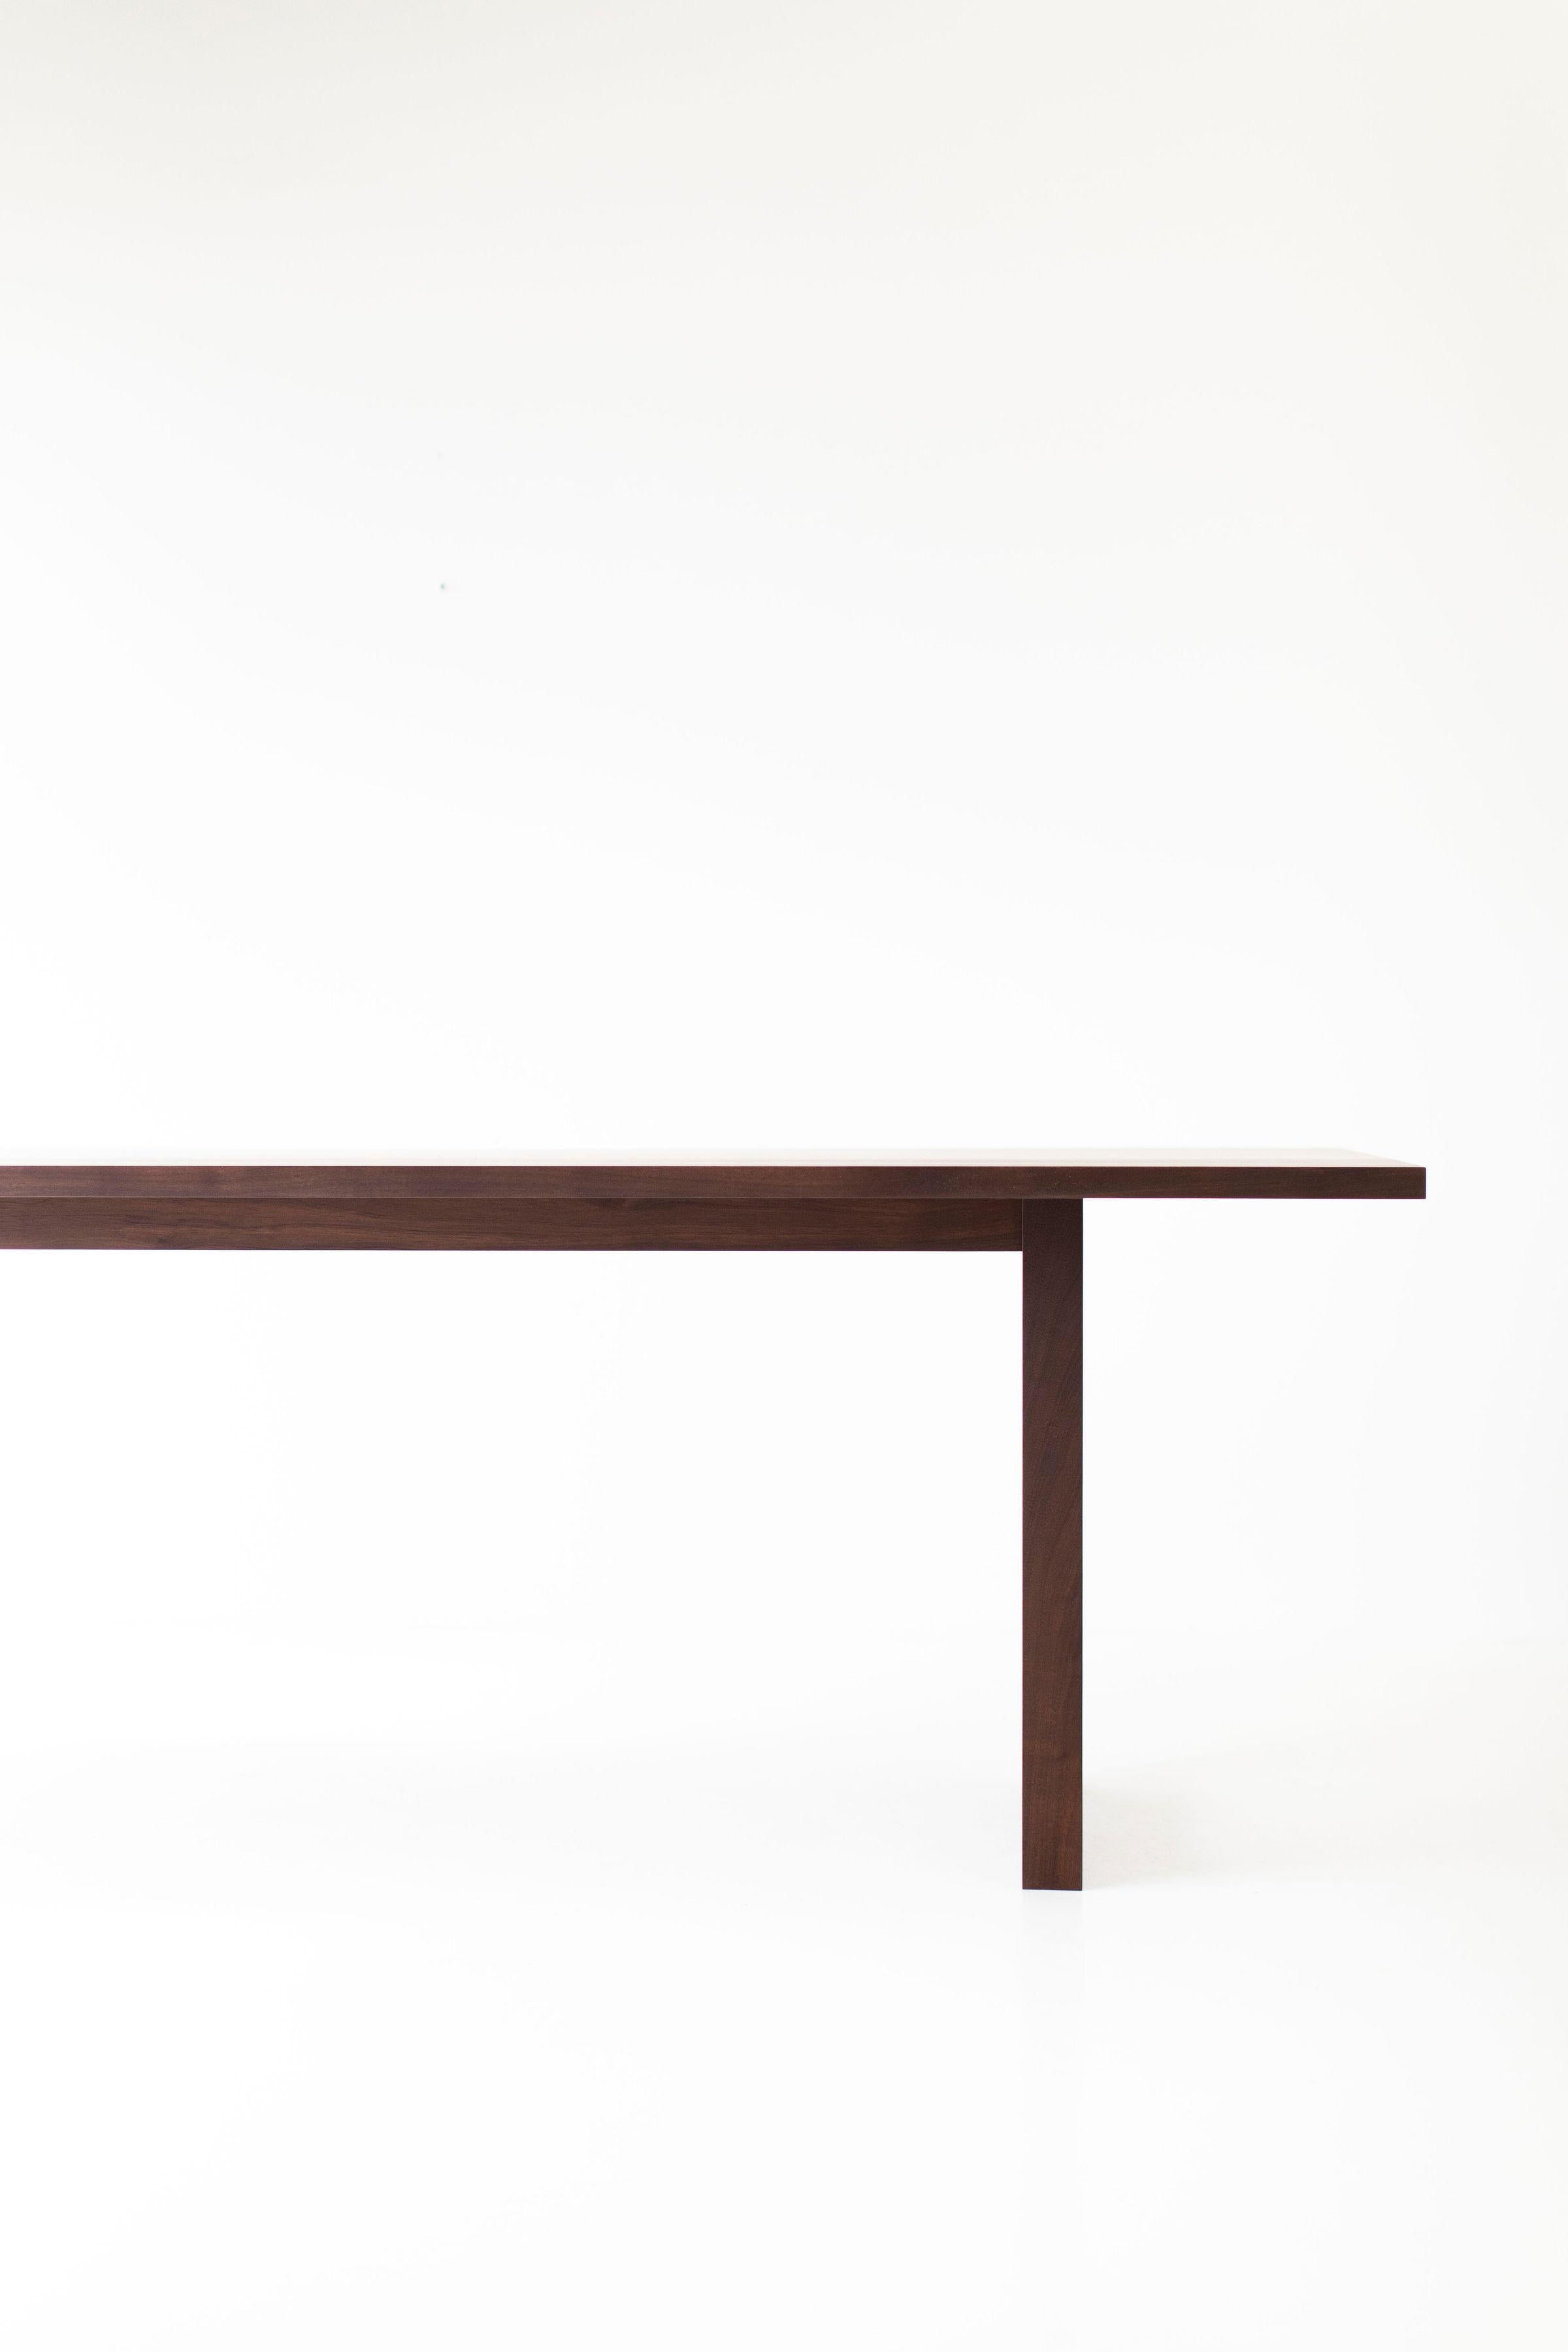 This simple modern dining table, walnut is made in the heart of Ohio with locally sourced wood. We use the table both as a harvest dining table or desk. Each table is handmade with solid black walnut and finished with a beautiful matte finish that